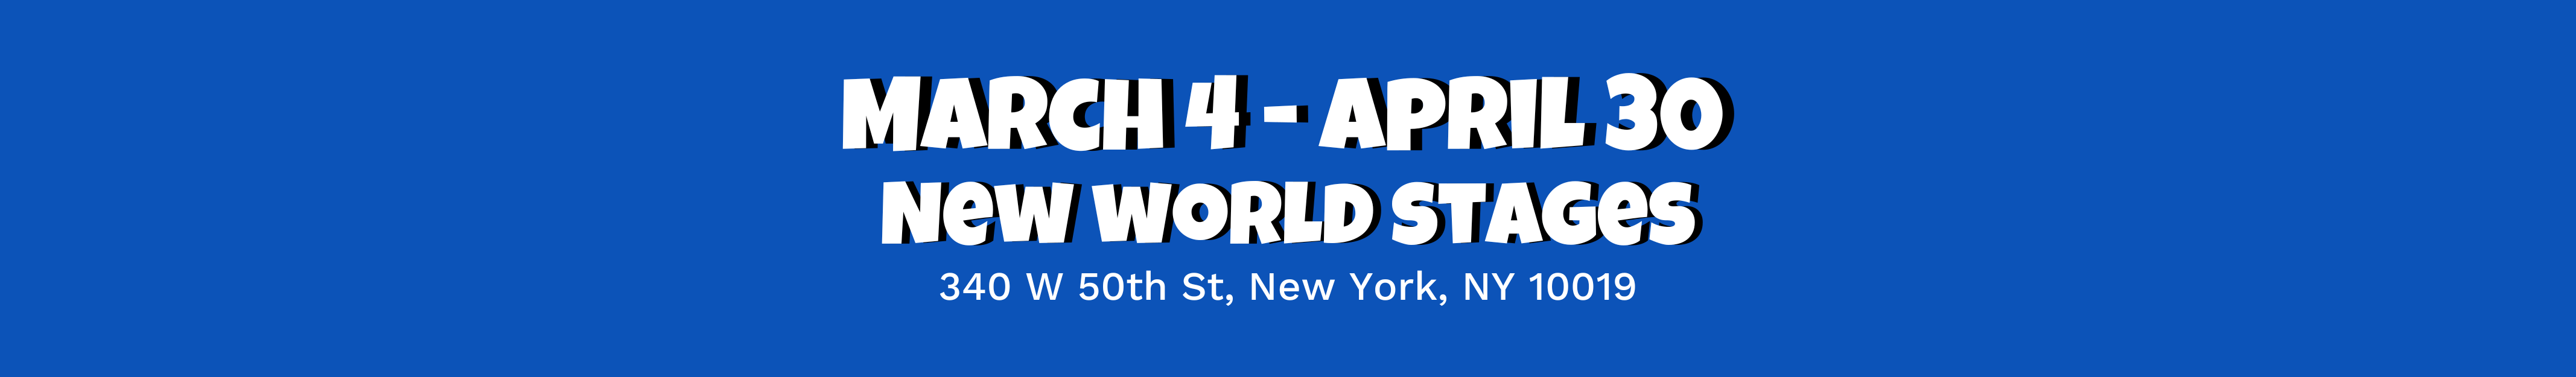 March 4 - April 30 New World Stages